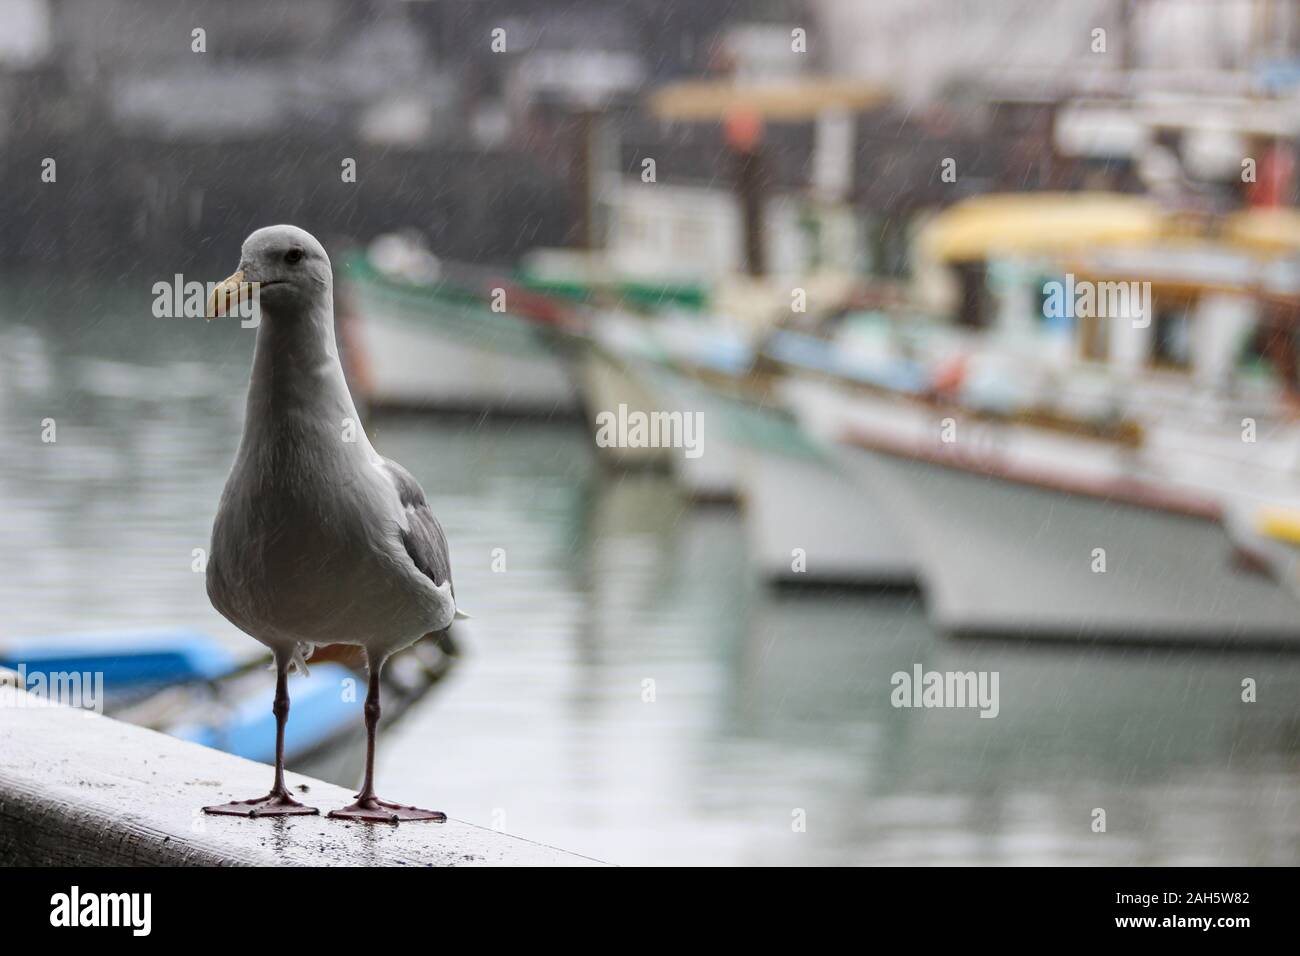 Western gull (Larus occidentalis) perching on a railing in Fisherman's Wharf on a rainy day. Fishing boats in the background. San Francisco, USA. Stock Photo